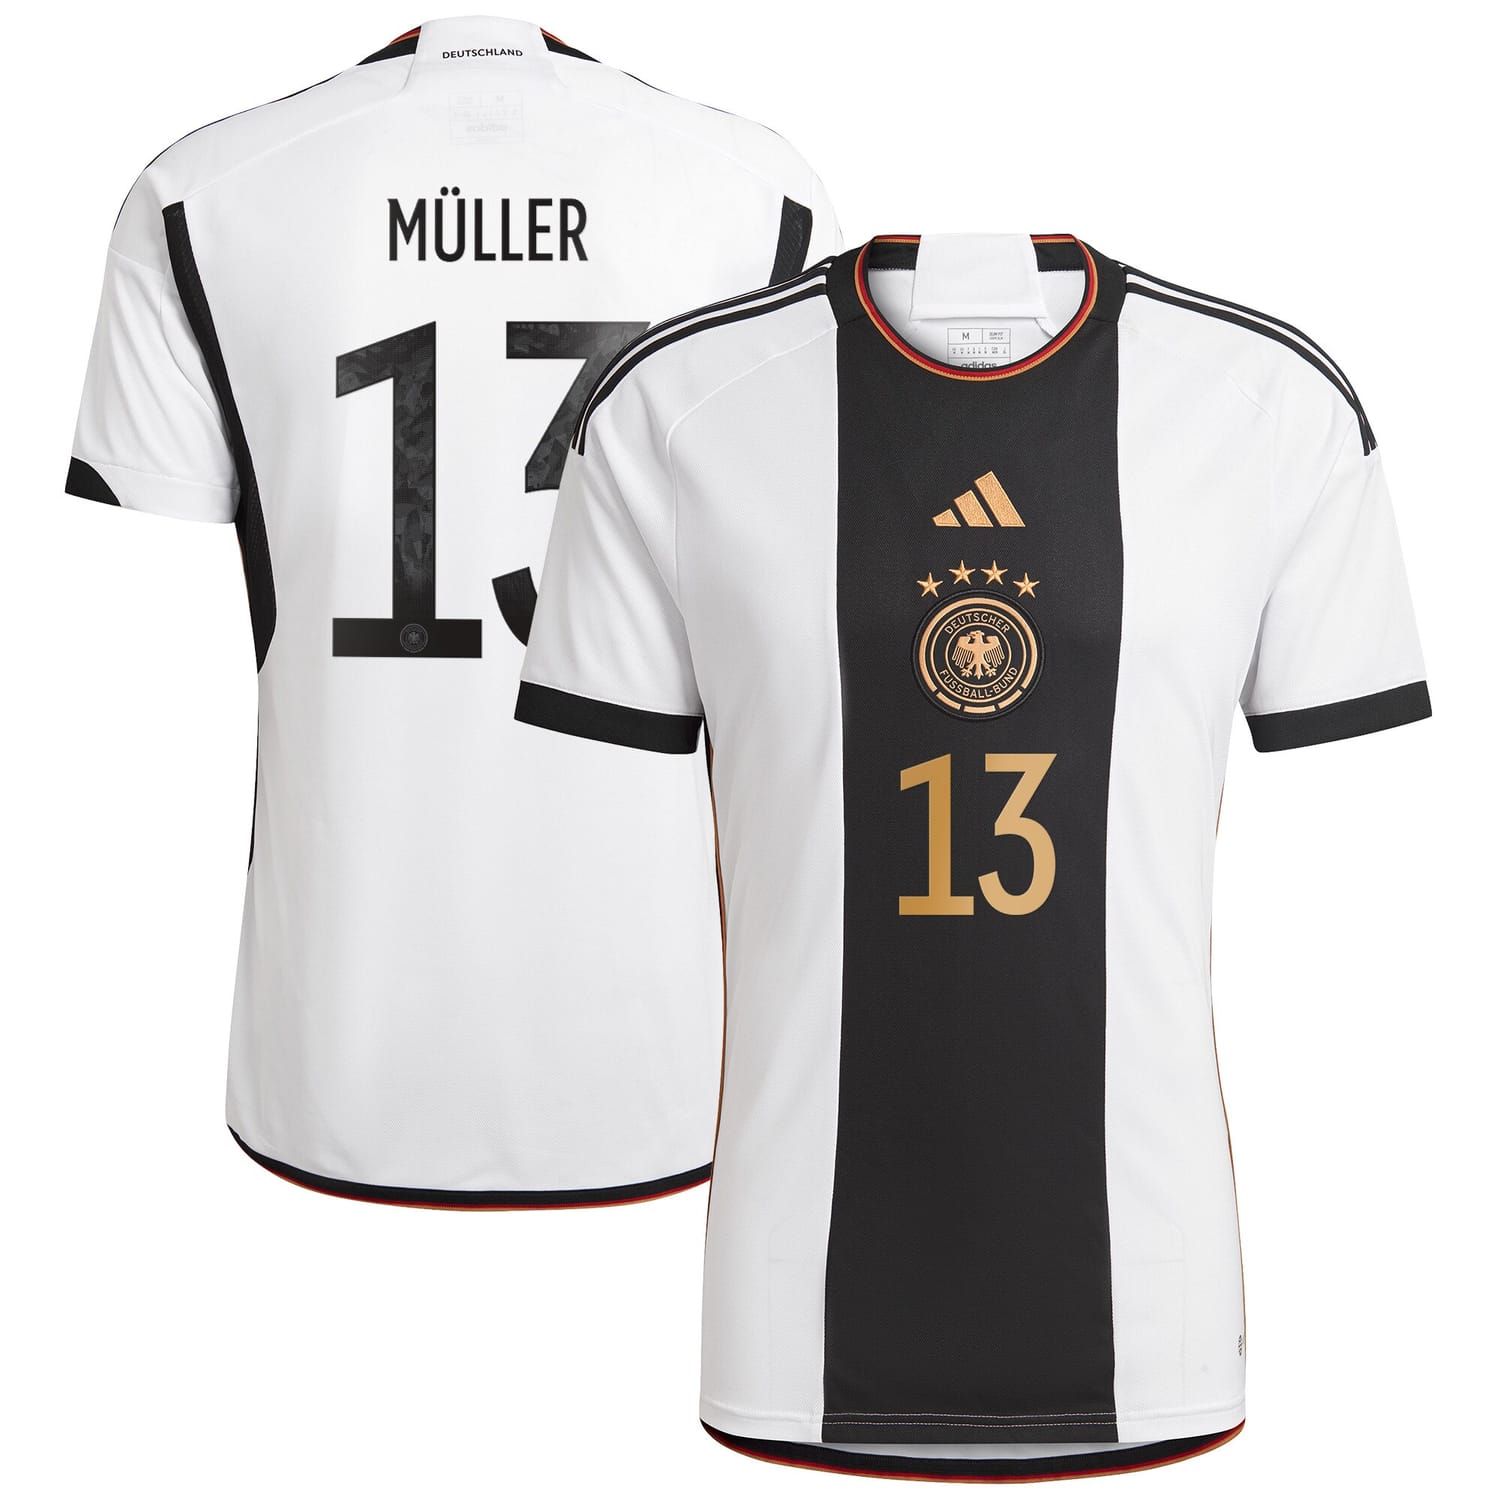 Germany National Team Home Jersey Shirt player Thomas Müller 13 printing for Men